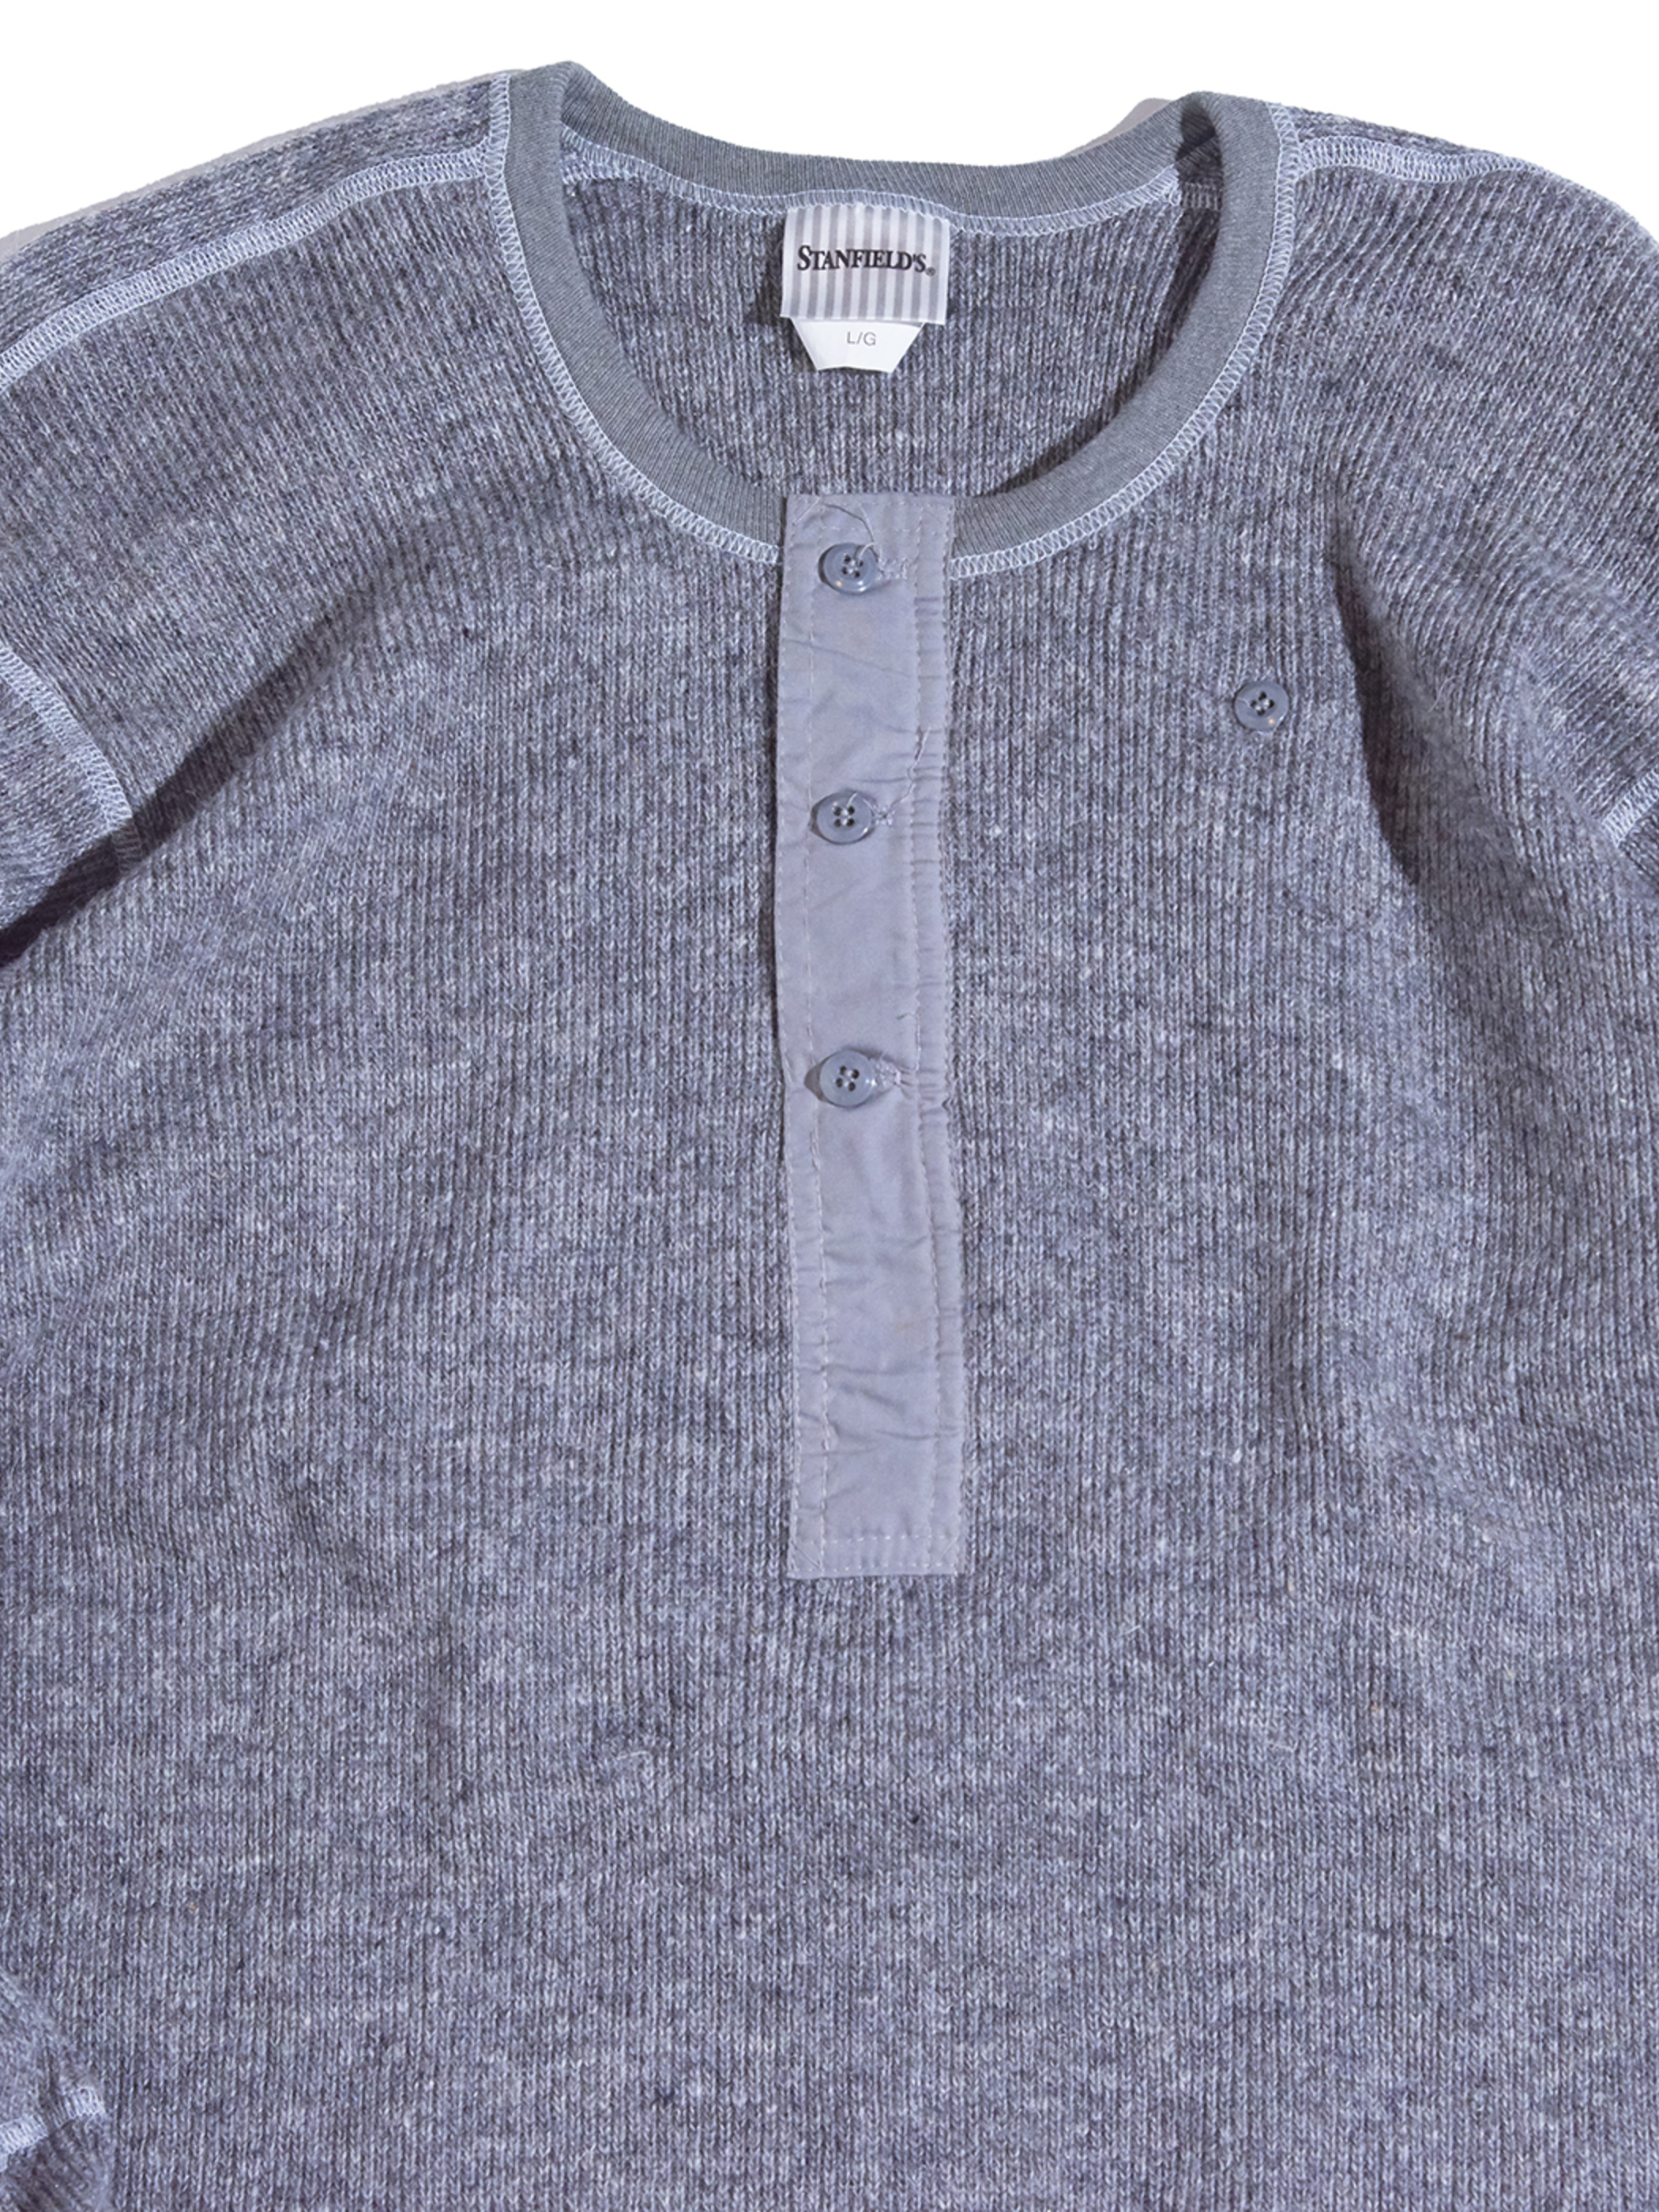 1980s "STANFIELD'S" wool henry thermal -GREY-